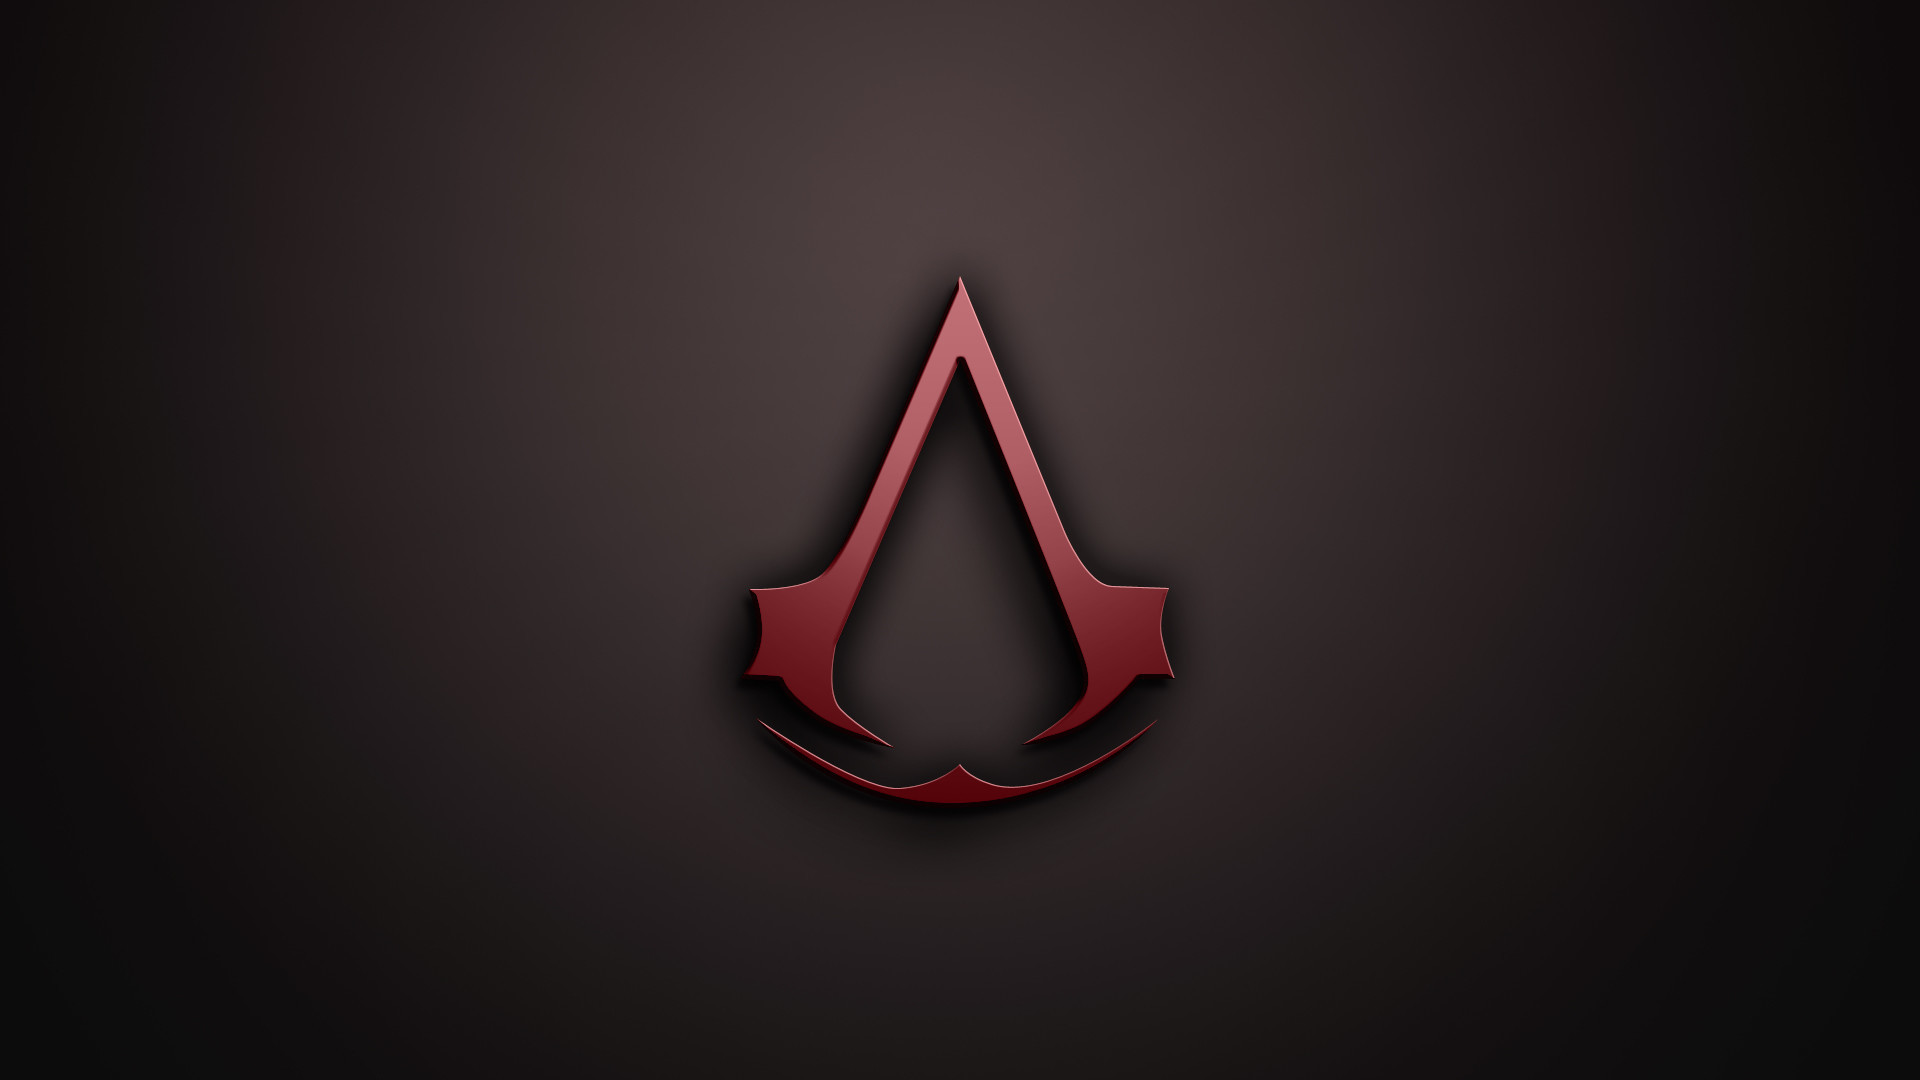 1920x1080  Assassins creed Wallpapers HD Desktop Backgrounds Images and